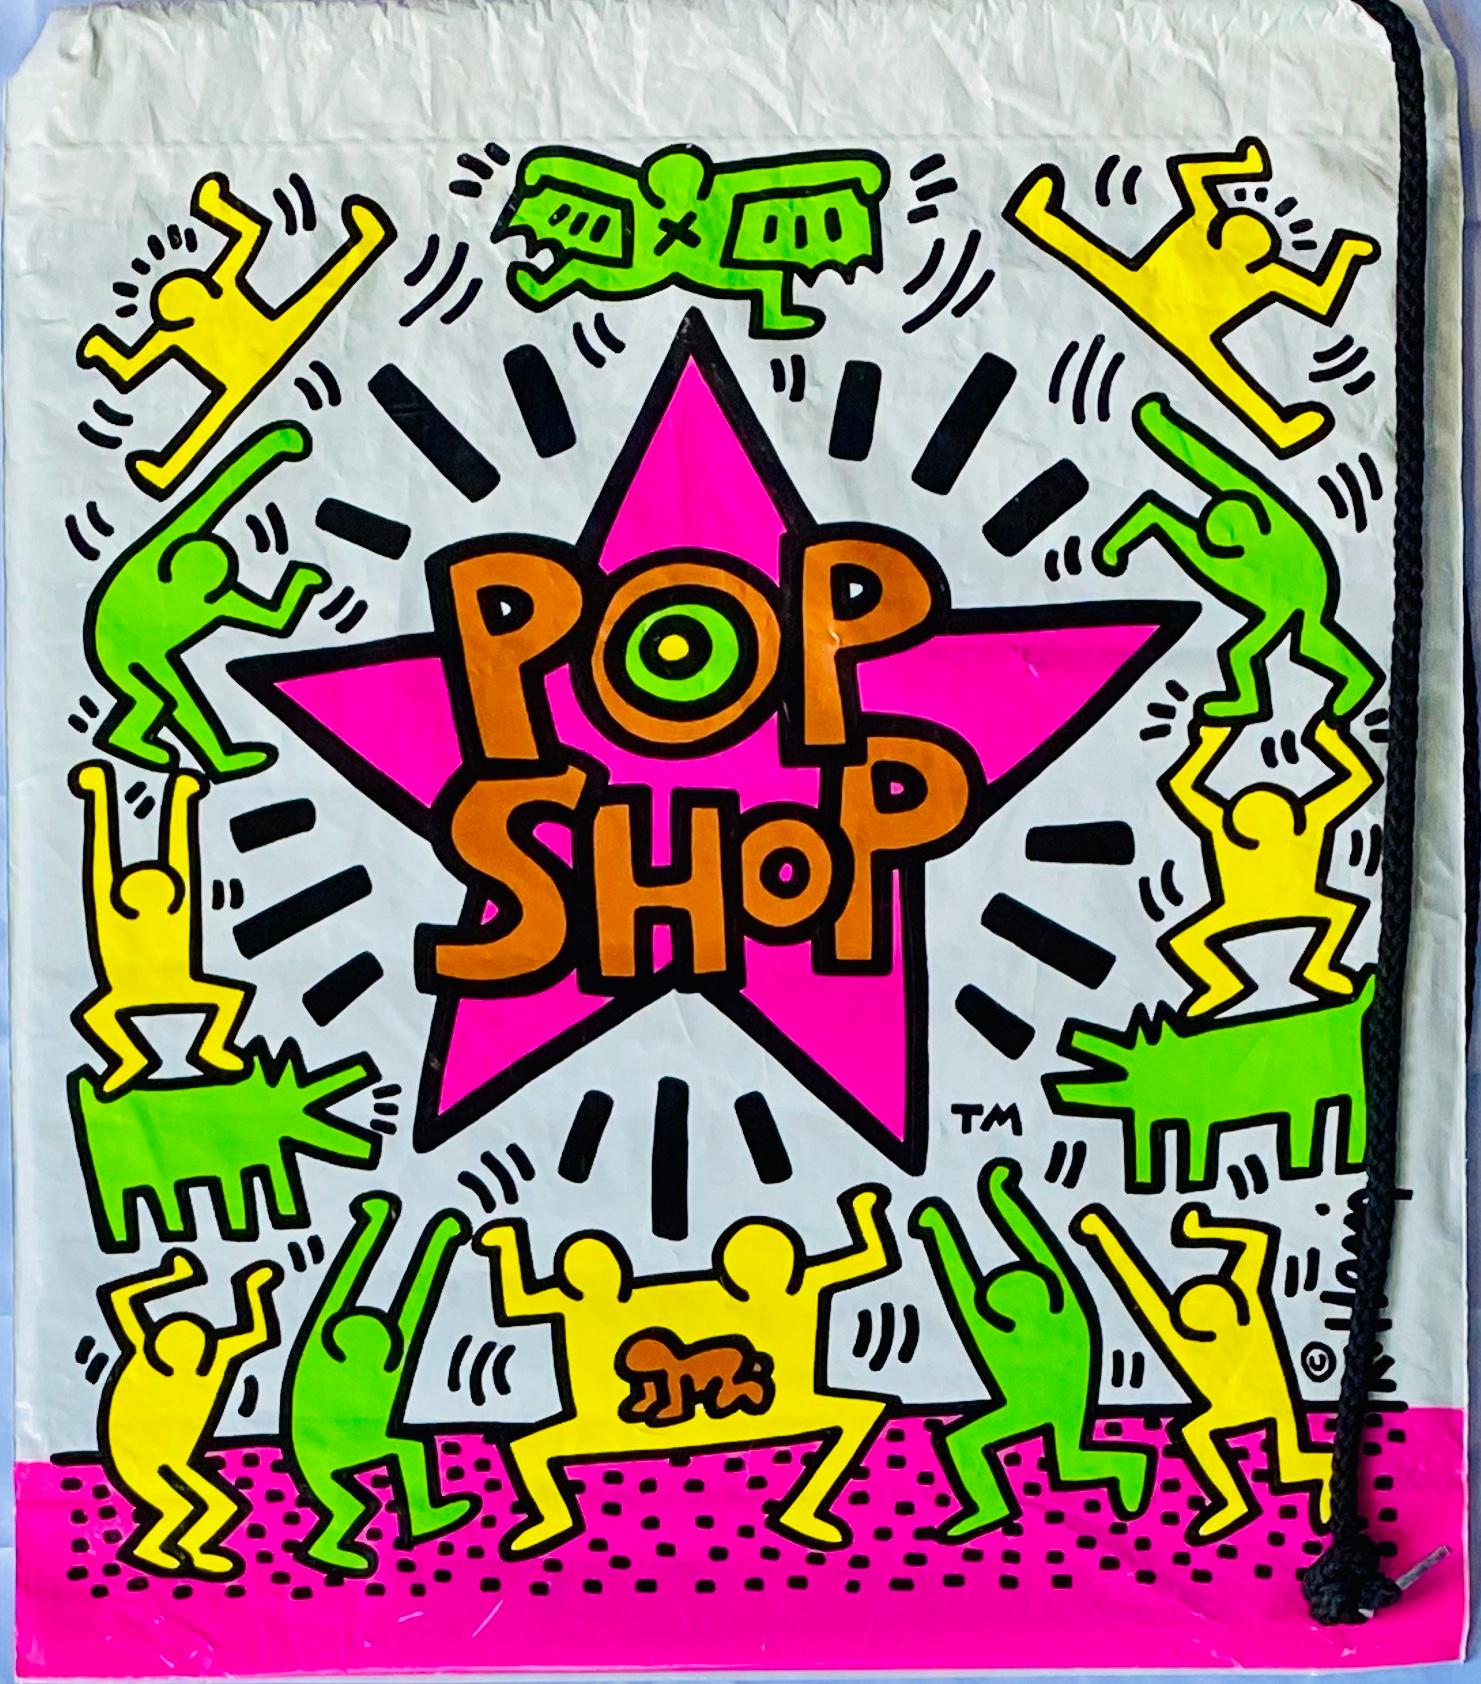 Keith Haring Pop Shop, 1986:
Vintage original 1980s Keith Haring Pop Shop bag designed & illustrated by the artist. Features a bold Keith Haring printed signature and standout original Haring Pop shop logos, plus bright, lush colors which make for a